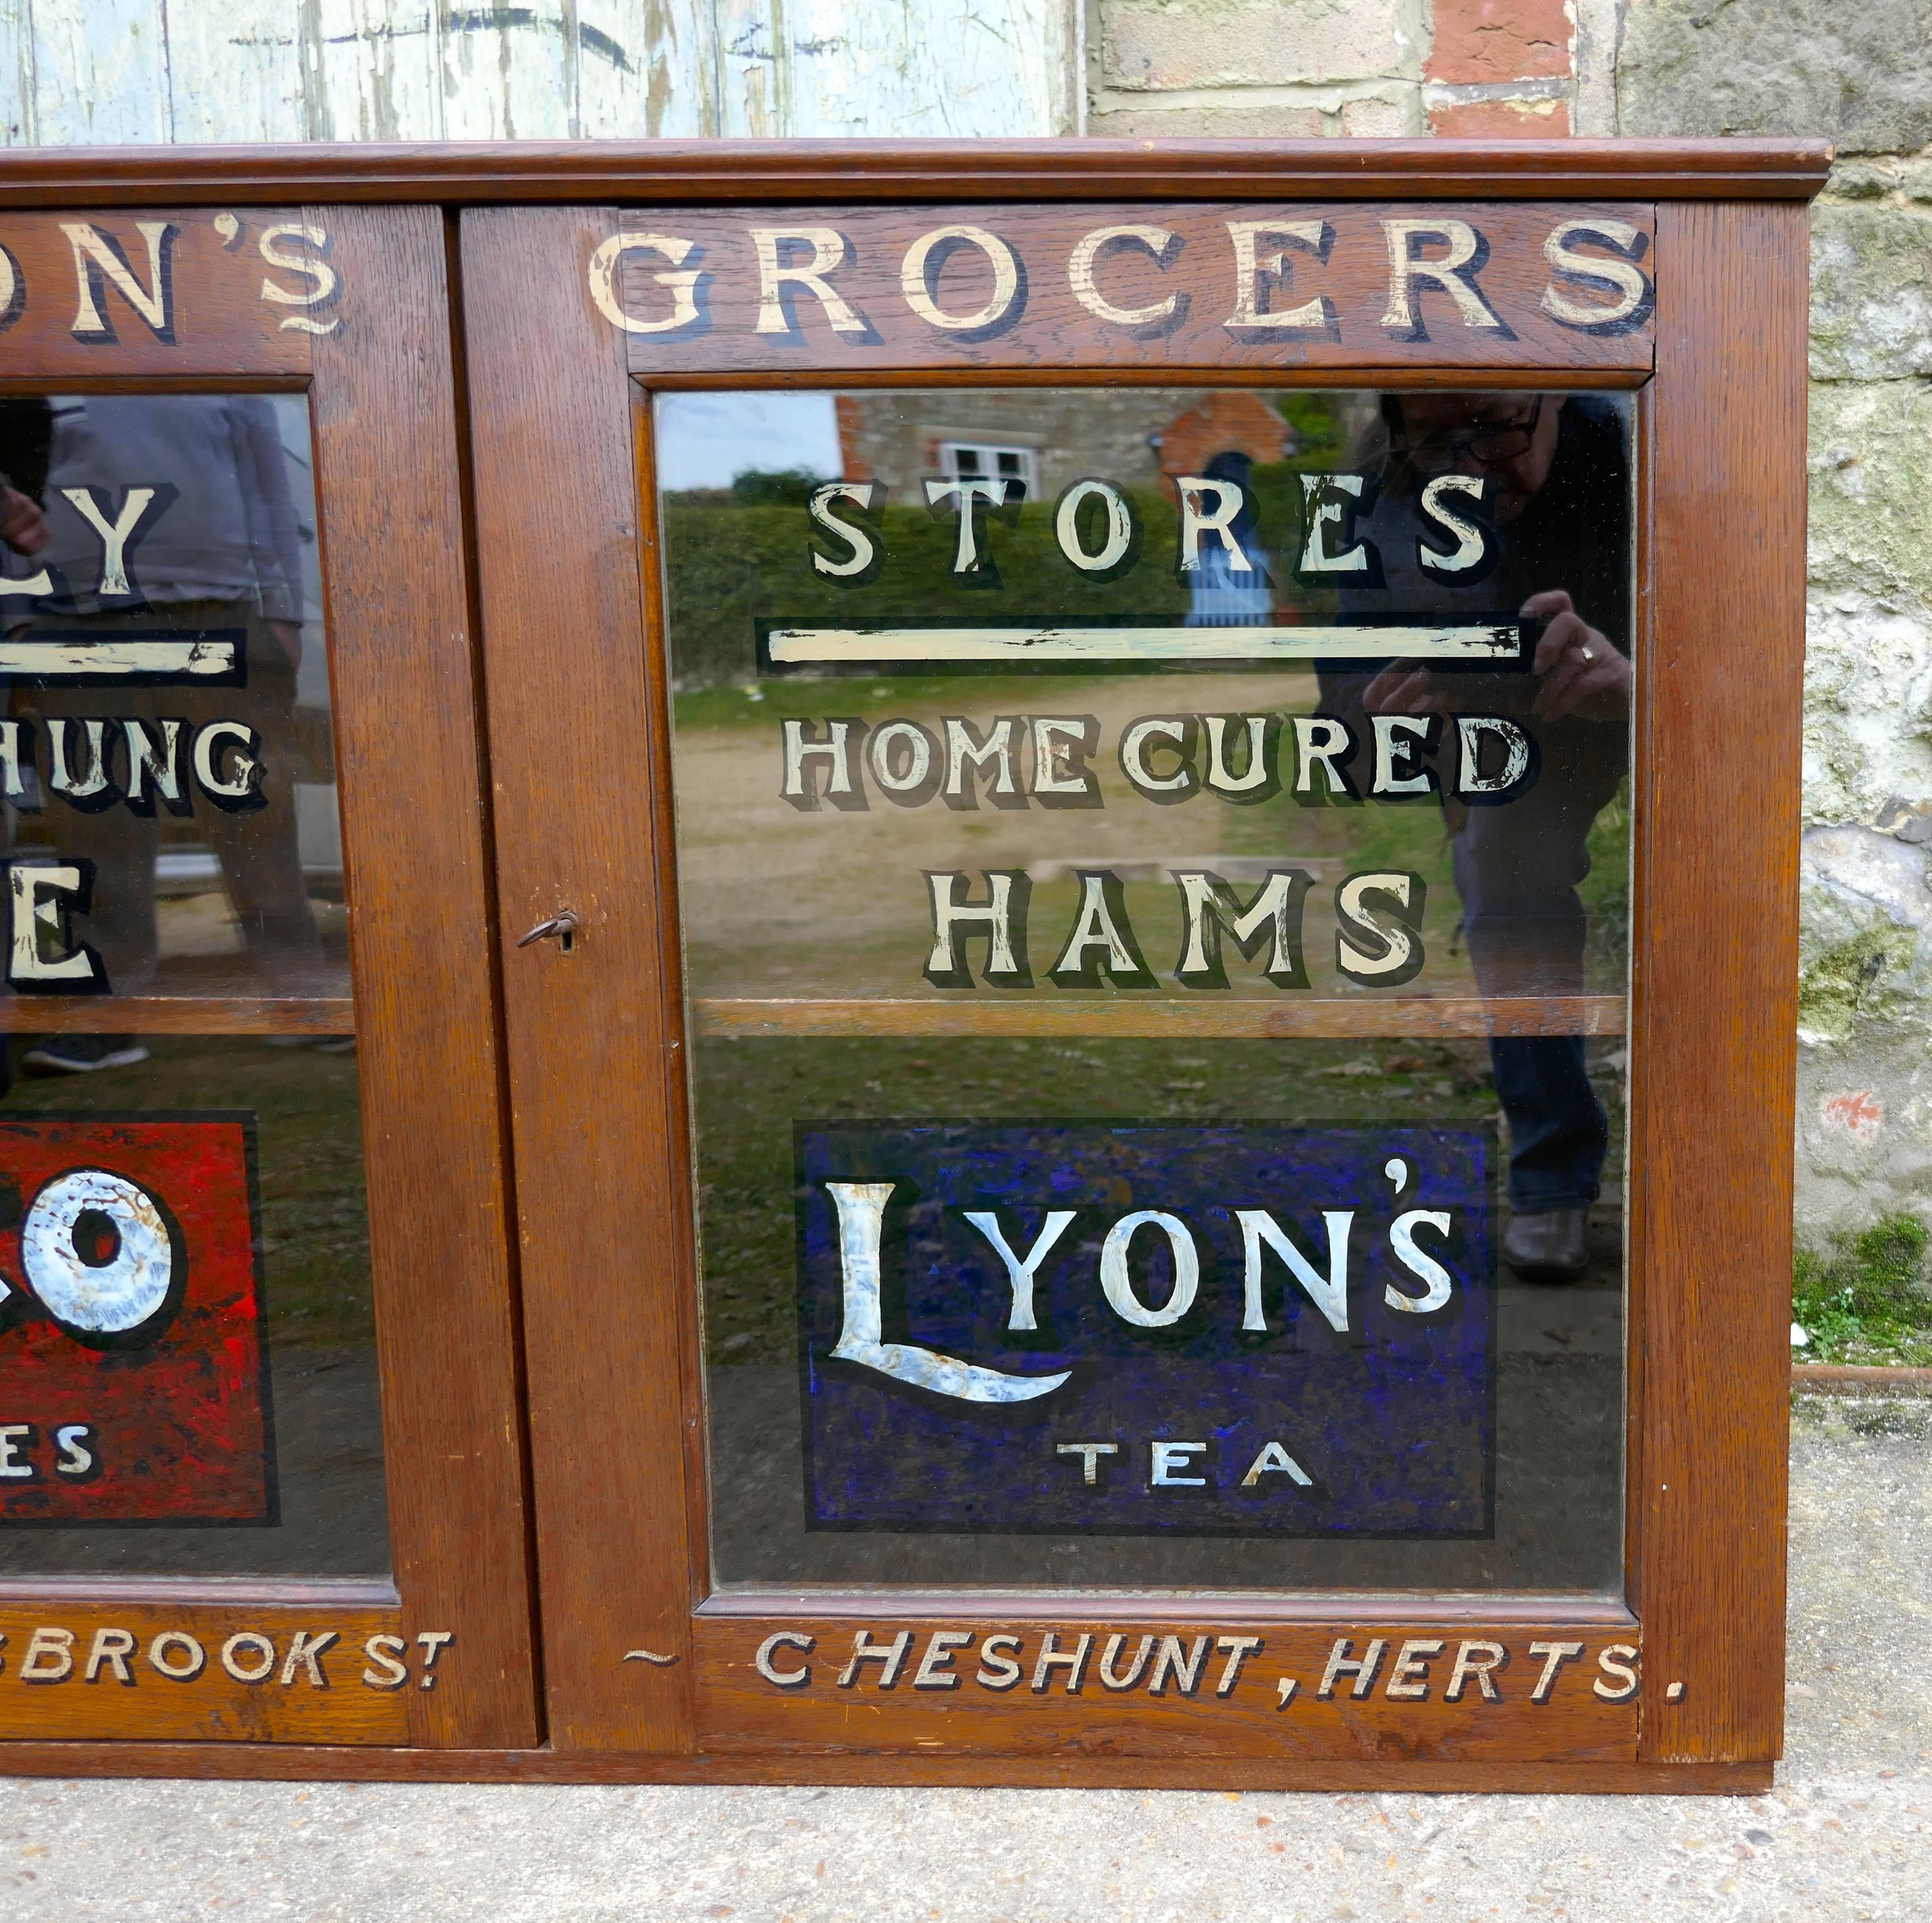 Victorian Sign painted grocers cupboard, farm shop country store

A magnificent piece of social history a Victorian Grocers shop cupboard from Sutton’s, advertising their own fresh and Hung Game products and cured Ham, also the logos for OXO Cubes